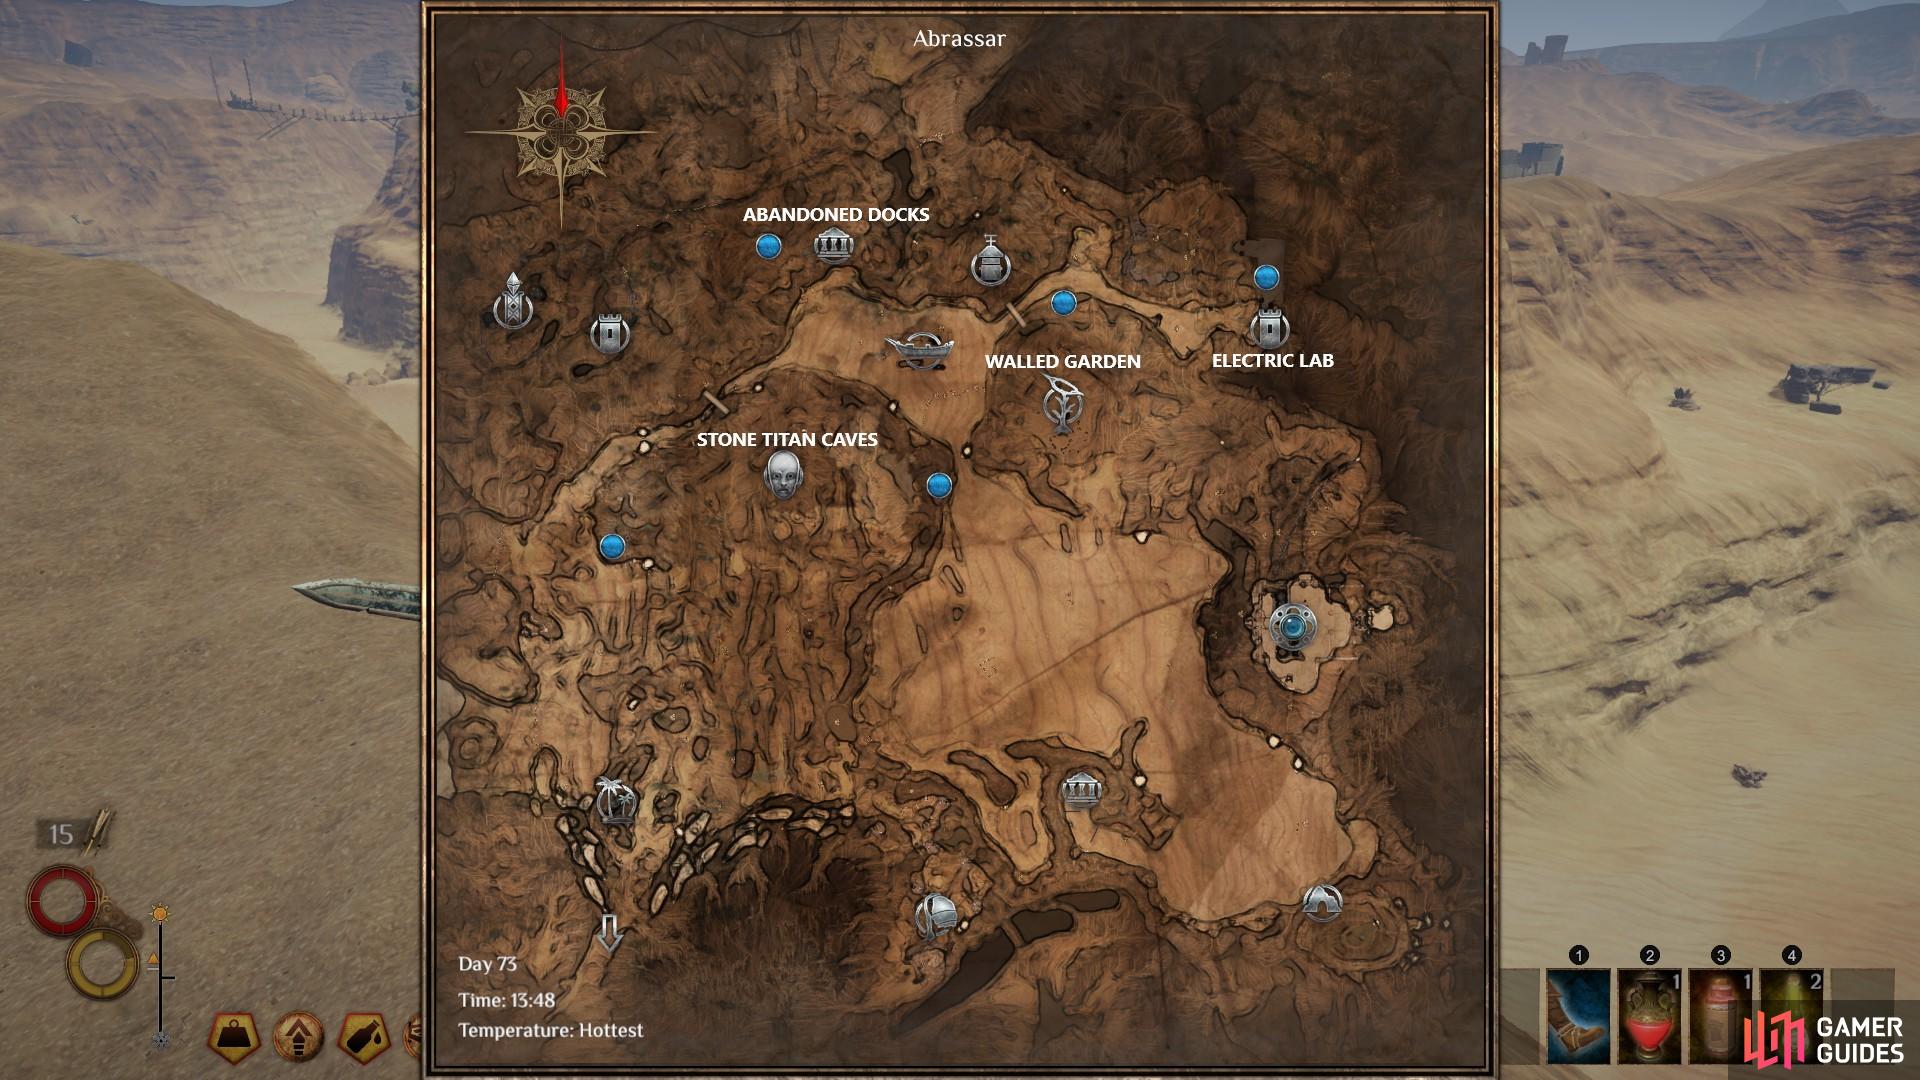 Map of Abrassar showing all five locations of altars with Ornate Chests, marked here by blue circles.